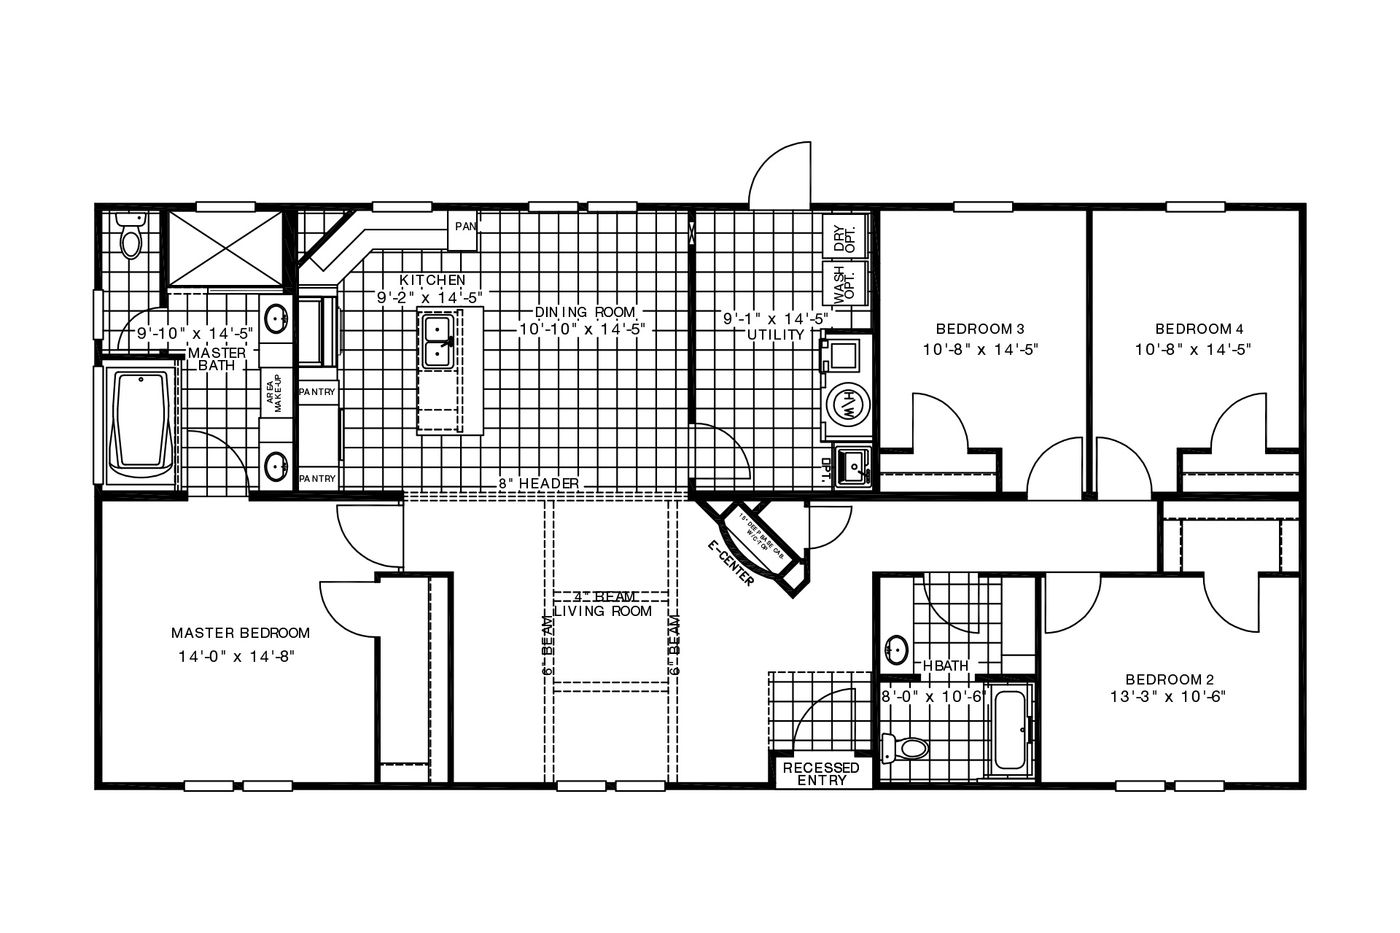 The THE FREEDOM GRAND 4BR 32X62 Floor Plan. This Manufactured Mobile Home features 4 bedrooms and 2 baths.